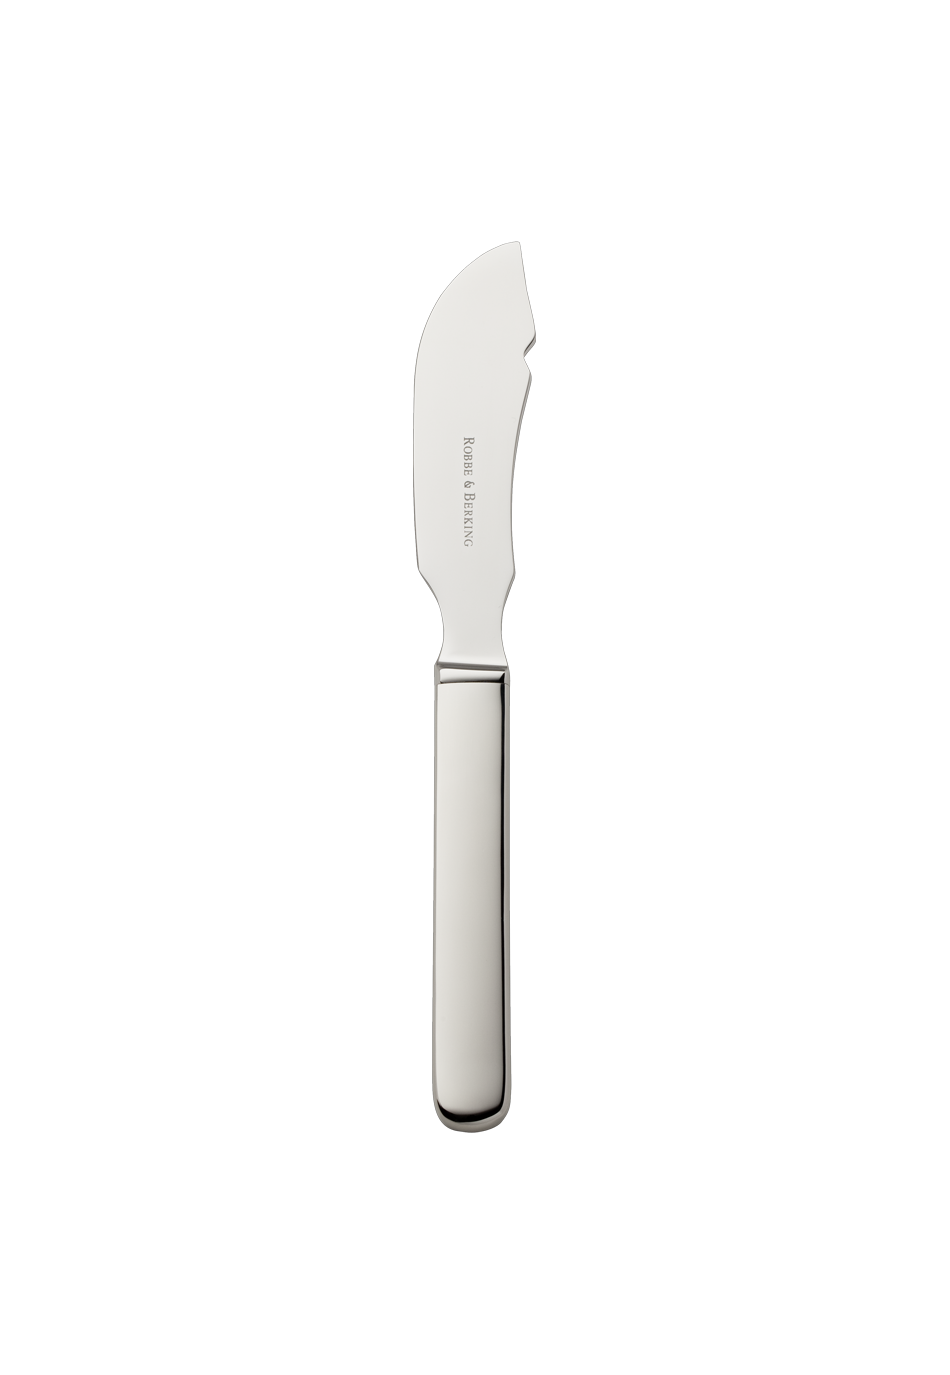 Topos Cheese Knife, hollow handle (18/8 stainless steel)